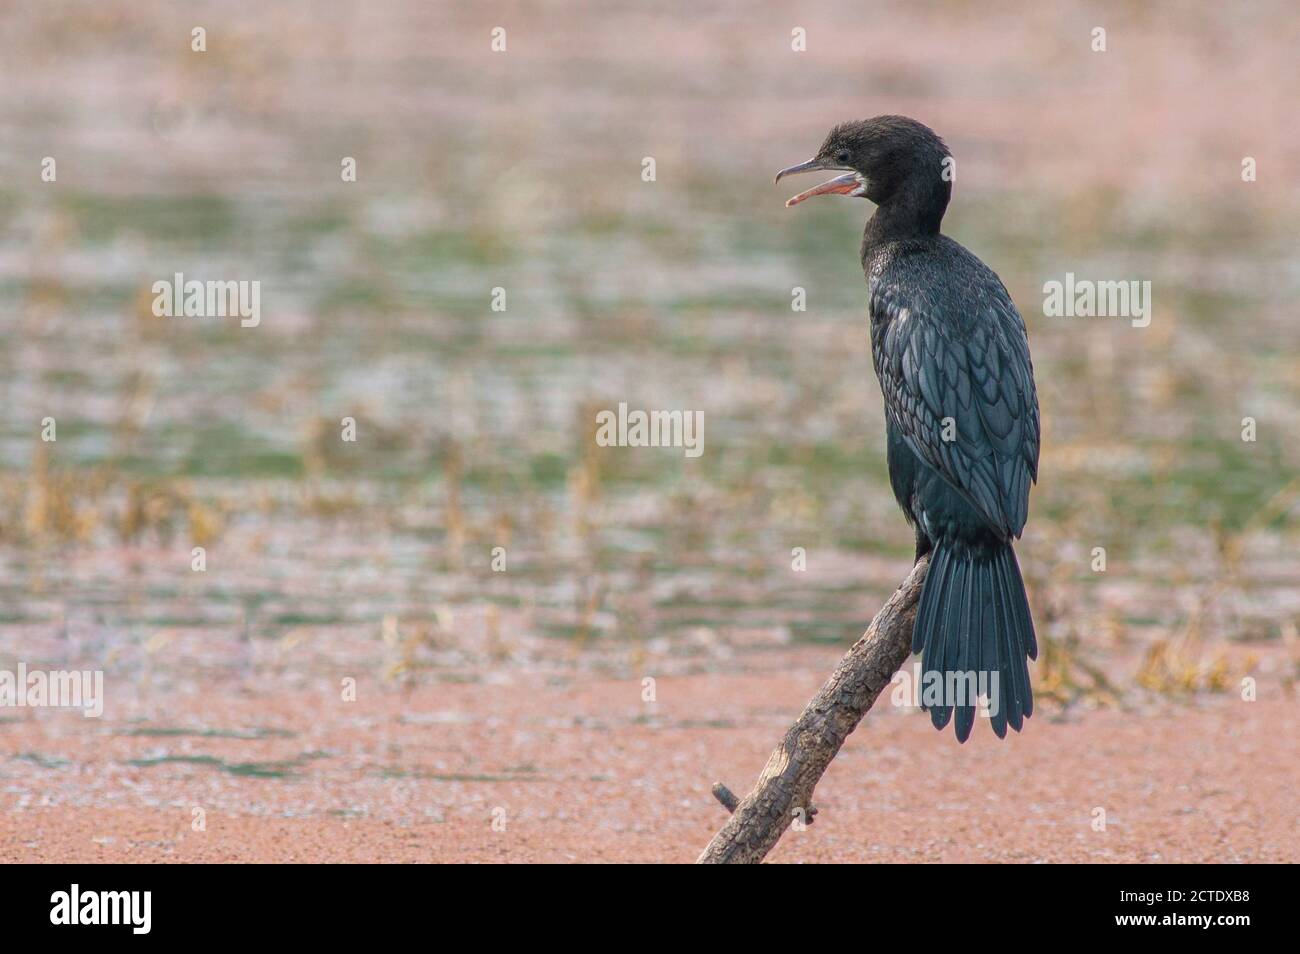 javanese cormorant (Phalacrocorax niger, Microcarbo niger), Adult perched on a branch, India Stock Photo